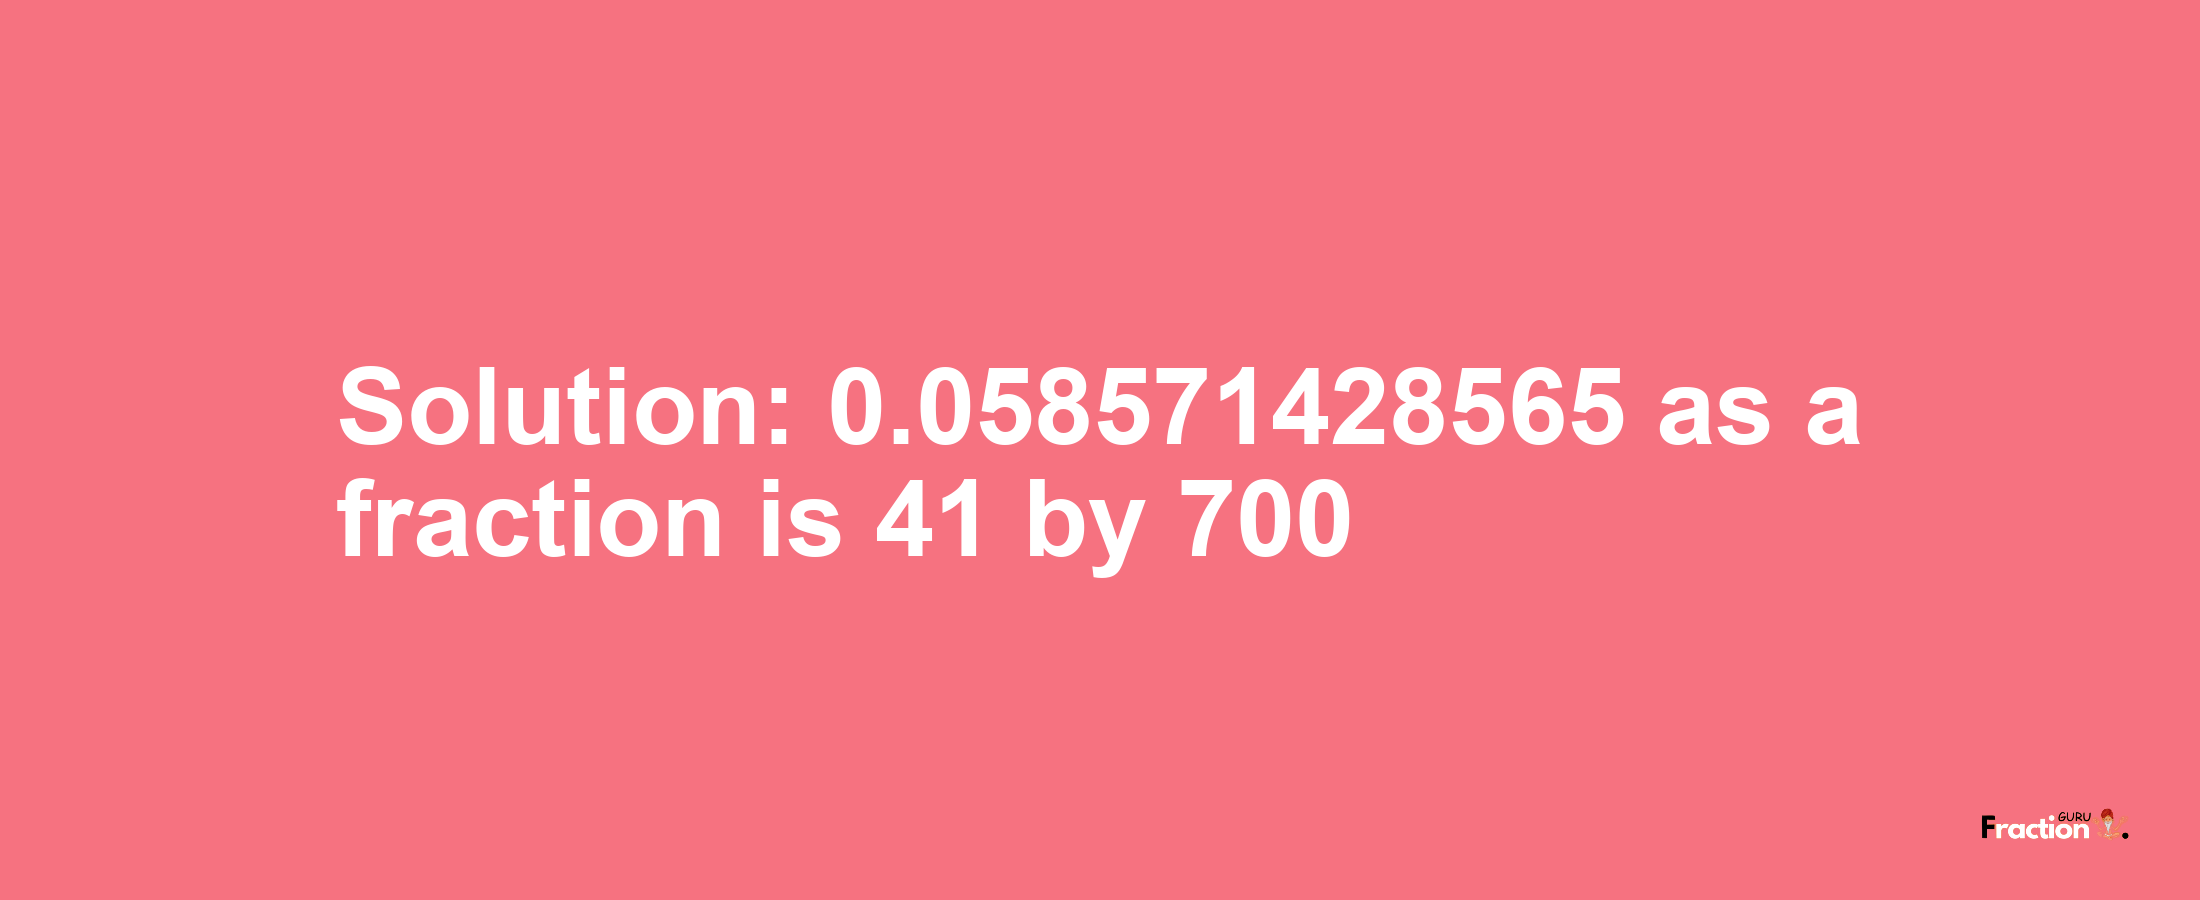 Solution:0.058571428565 as a fraction is 41/700